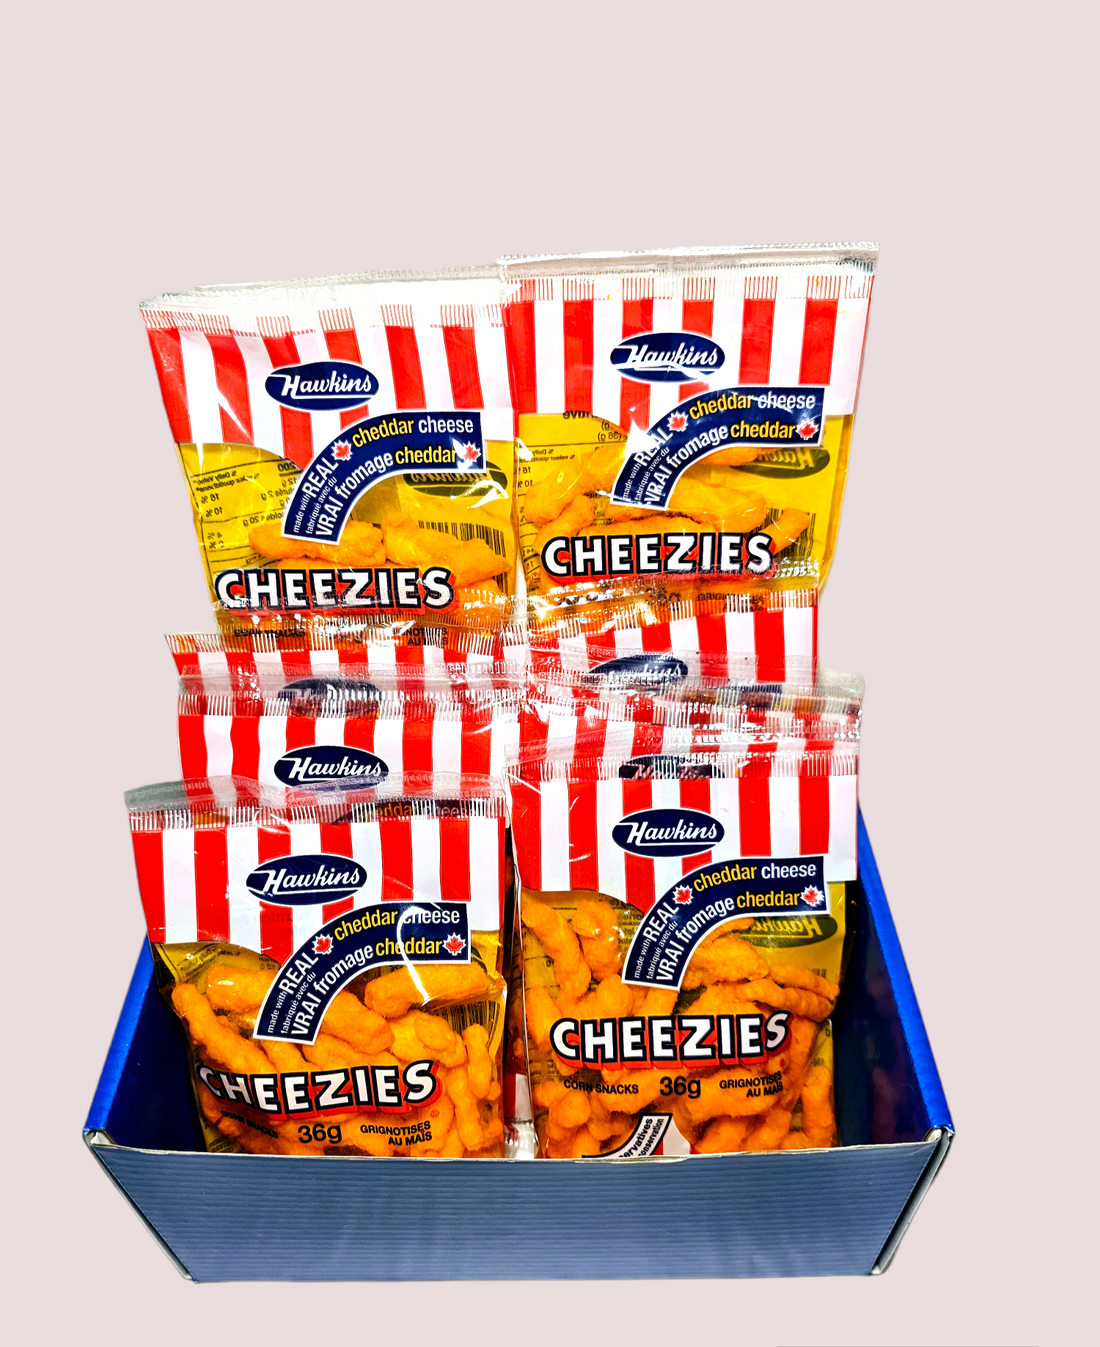 Cheezies Chips Box, Canadian Chips, Cheezies Canadian chip bags of 10